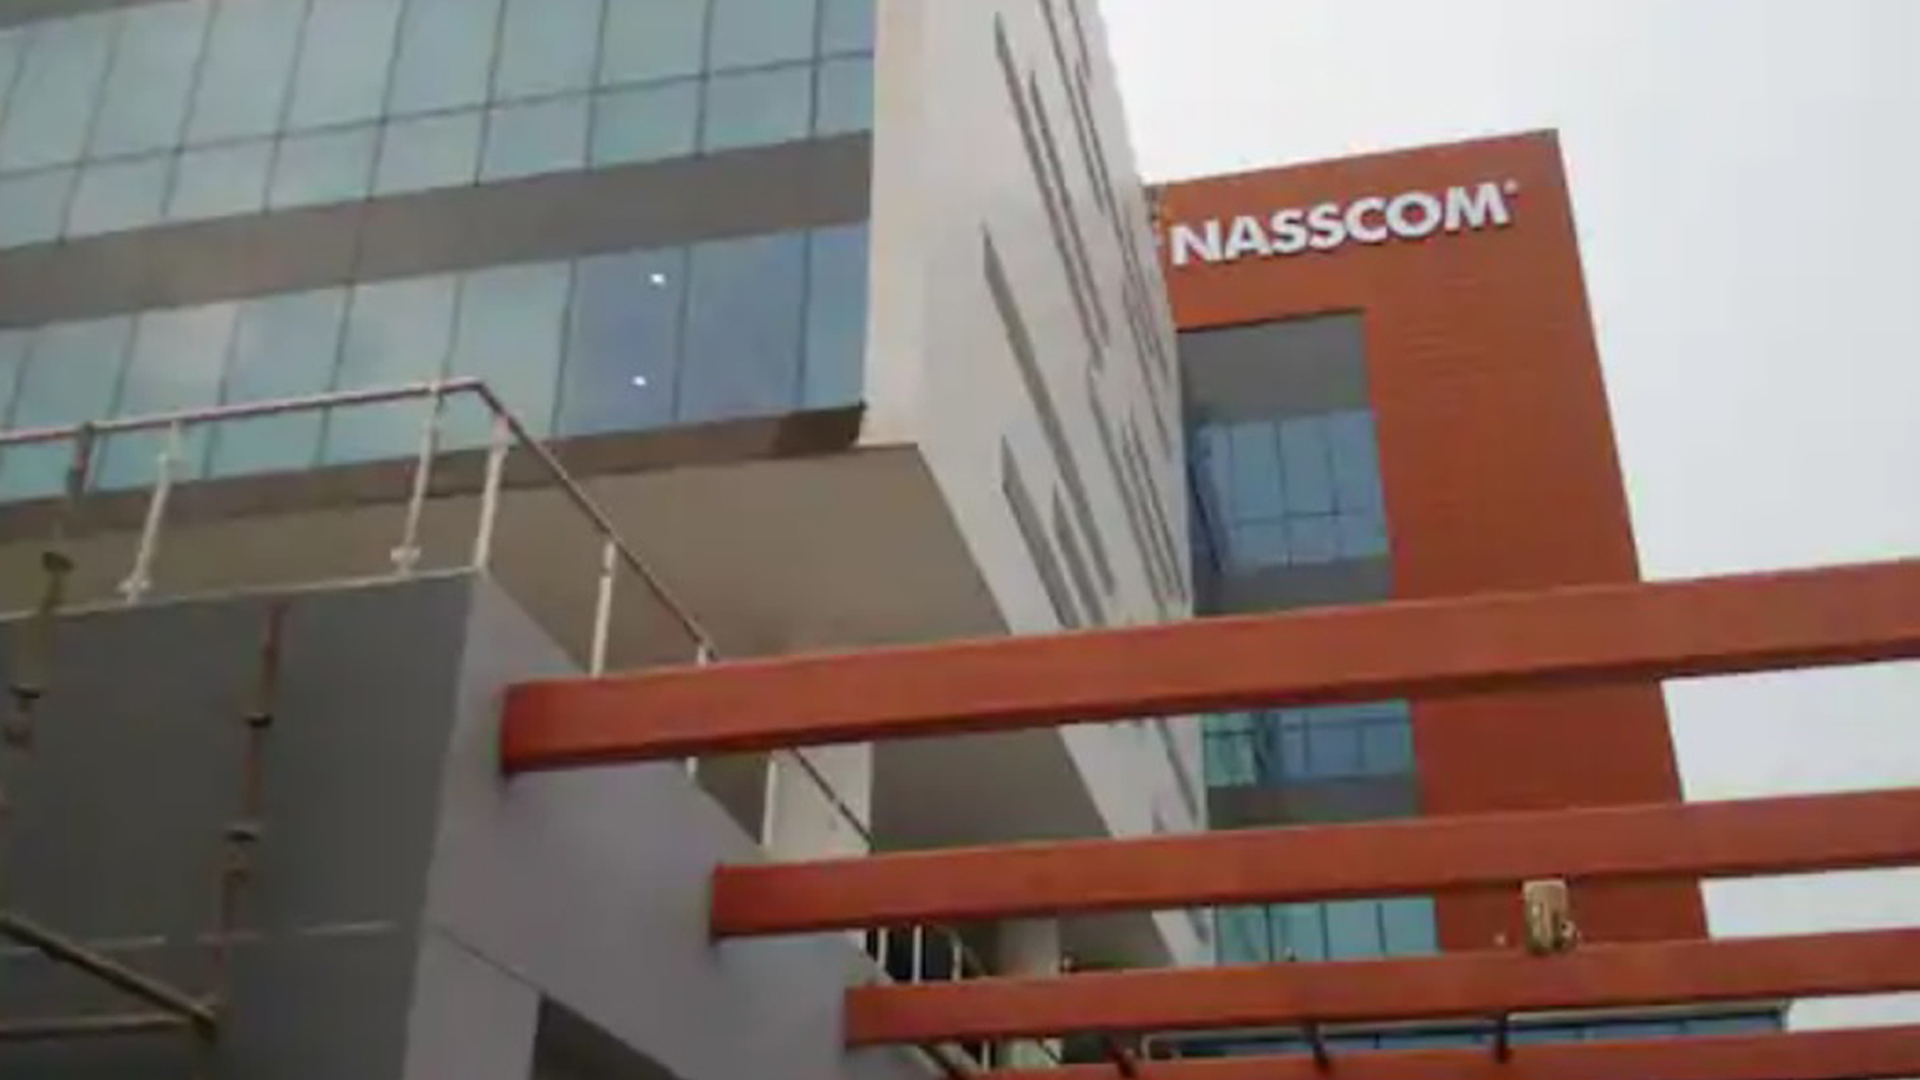  Essential Tech Workers Should Be Exempted From Visa Restrictions In Us: Nasscom,-TeluguStop.com